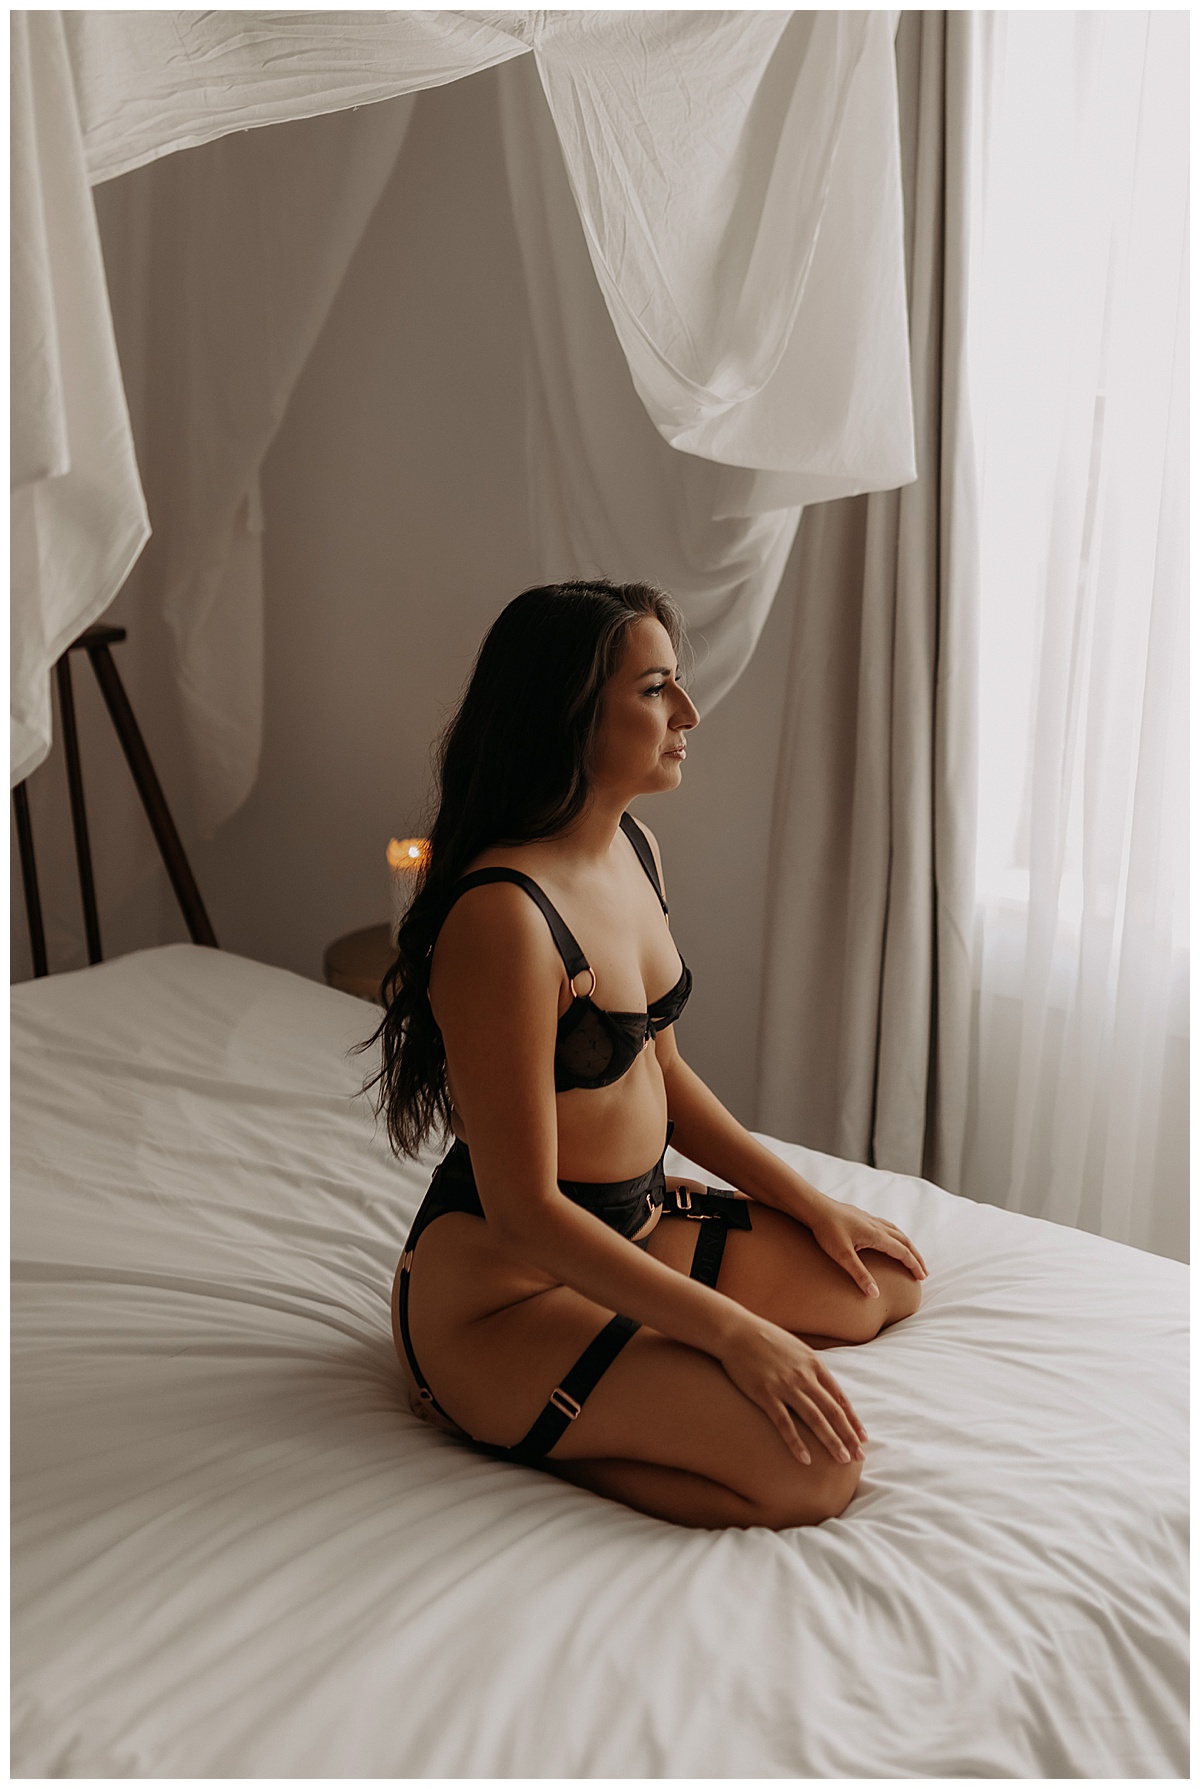 Woman kneels on bed wearing black strappy lingerie before Celebrating In Your Birthday Suit